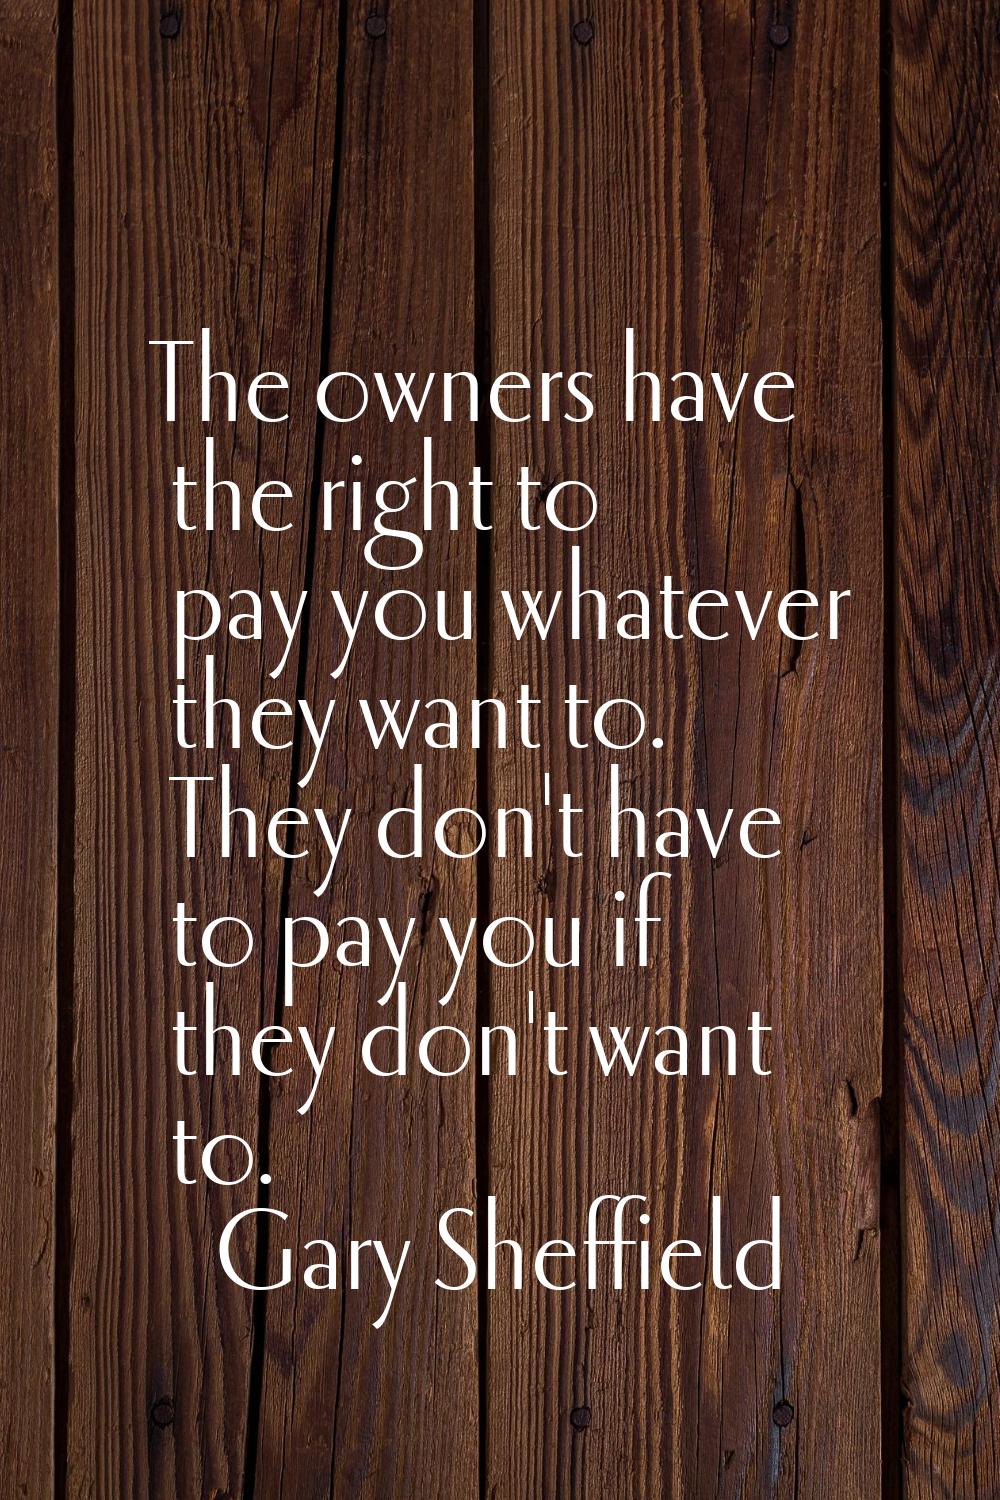 The owners have the right to pay you whatever they want to. They don't have to pay you if they don'